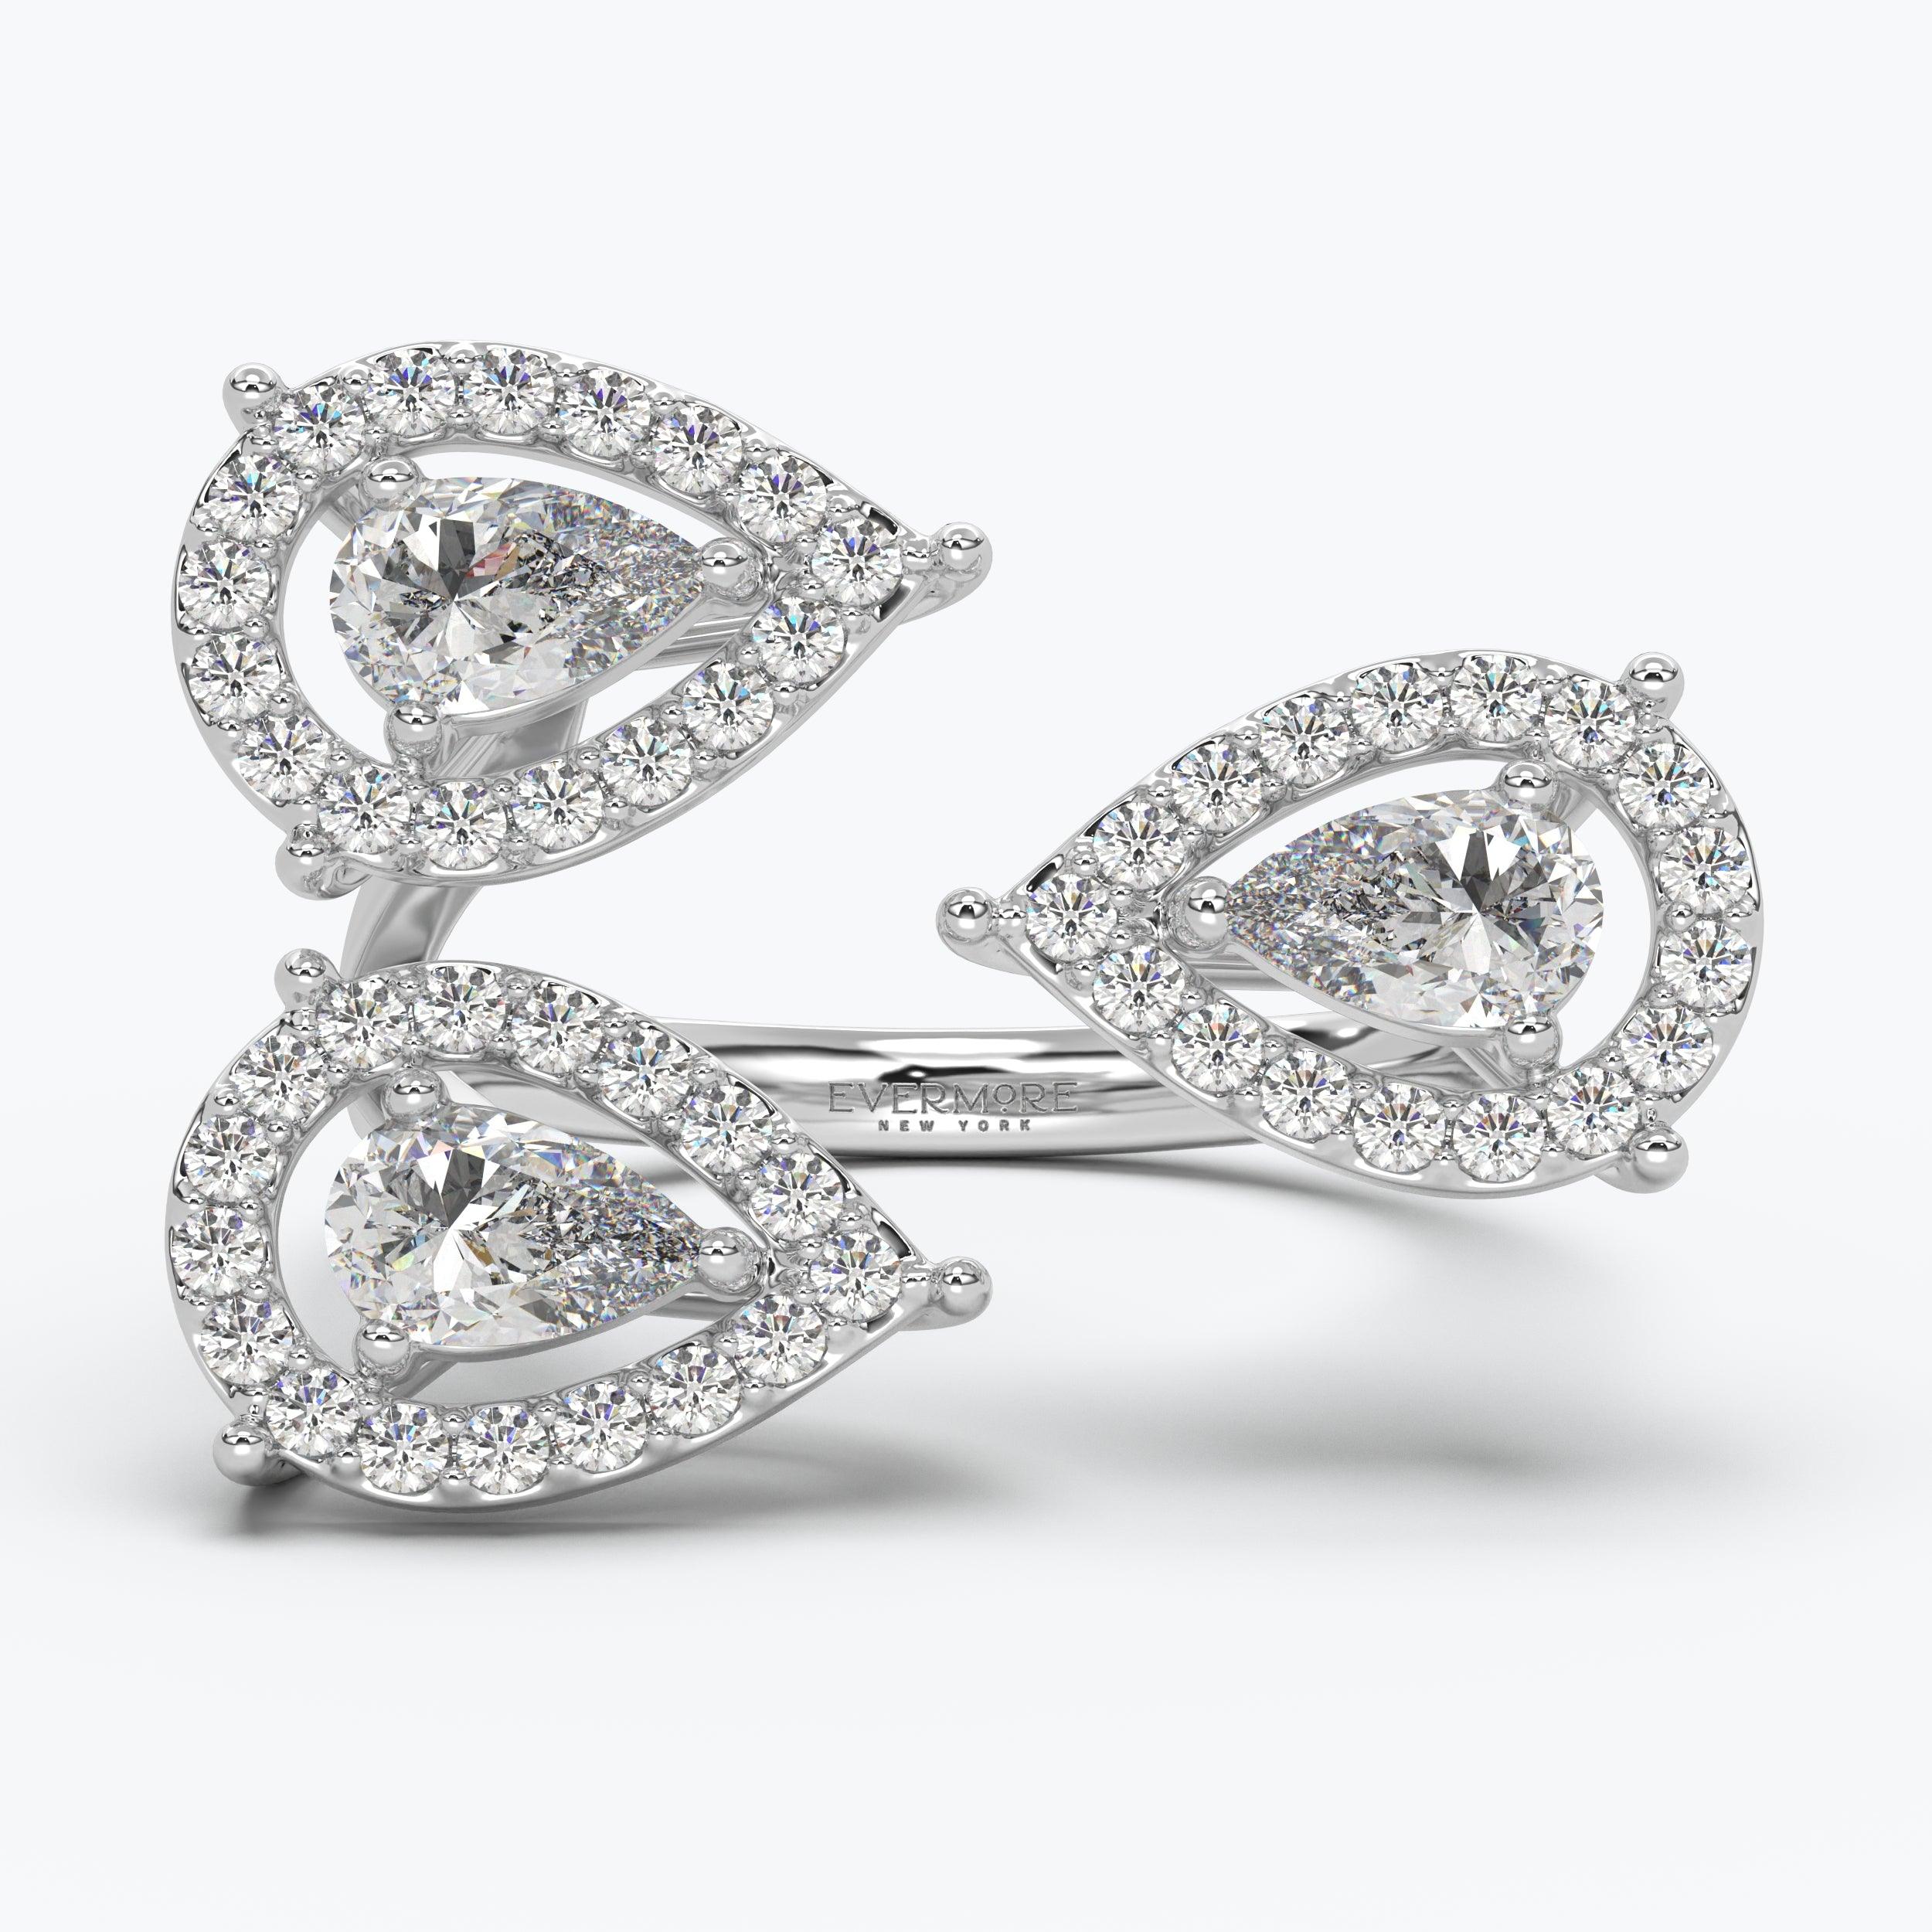 The Emory Pear Cut Halo - White Gold / 0.5 ct - Evermore Diamonds